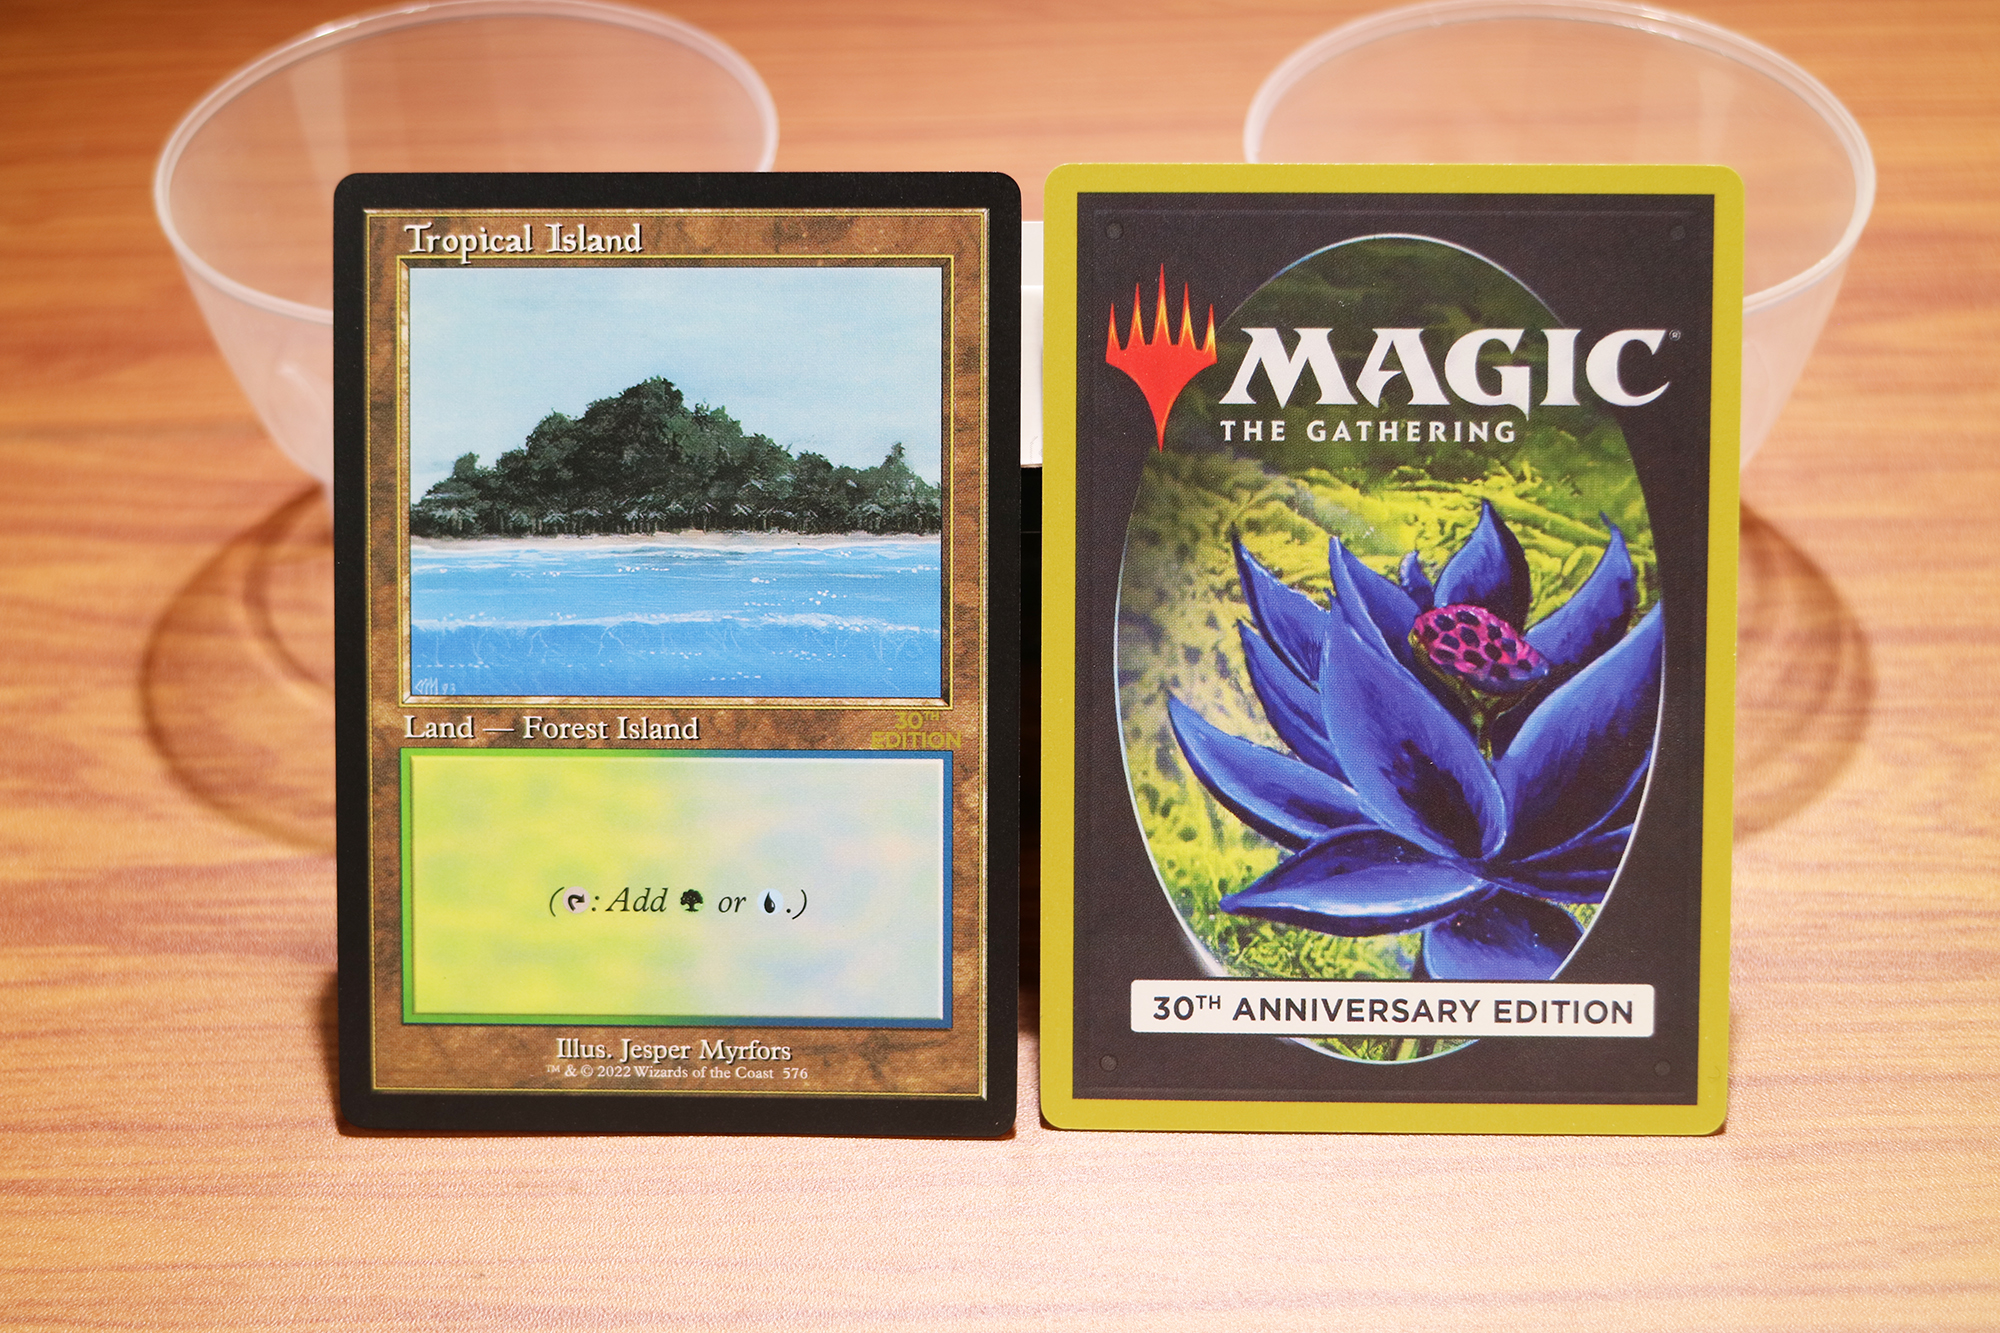 Tropical Island #576 30th Anniversary Edition (30A) magic the gathering  proxy mtg cards Top Quality